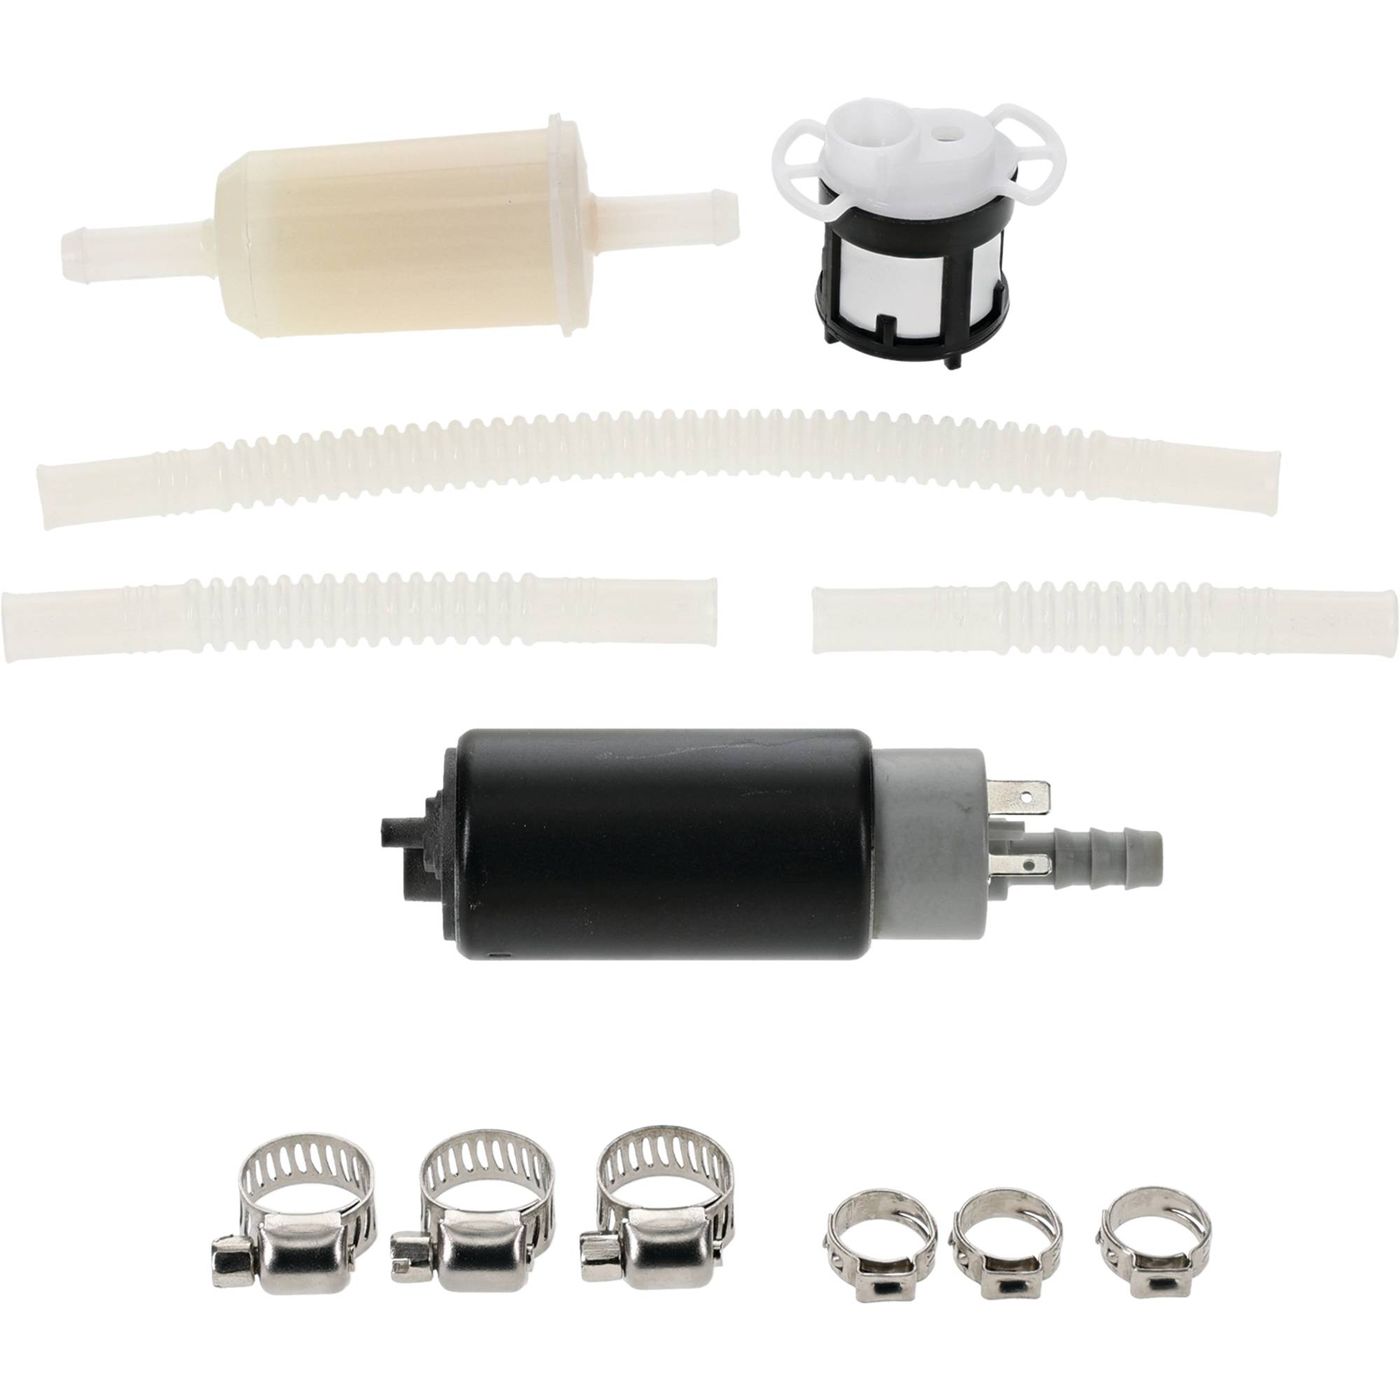 Wrp Fuel Pumps - WRP472036 image